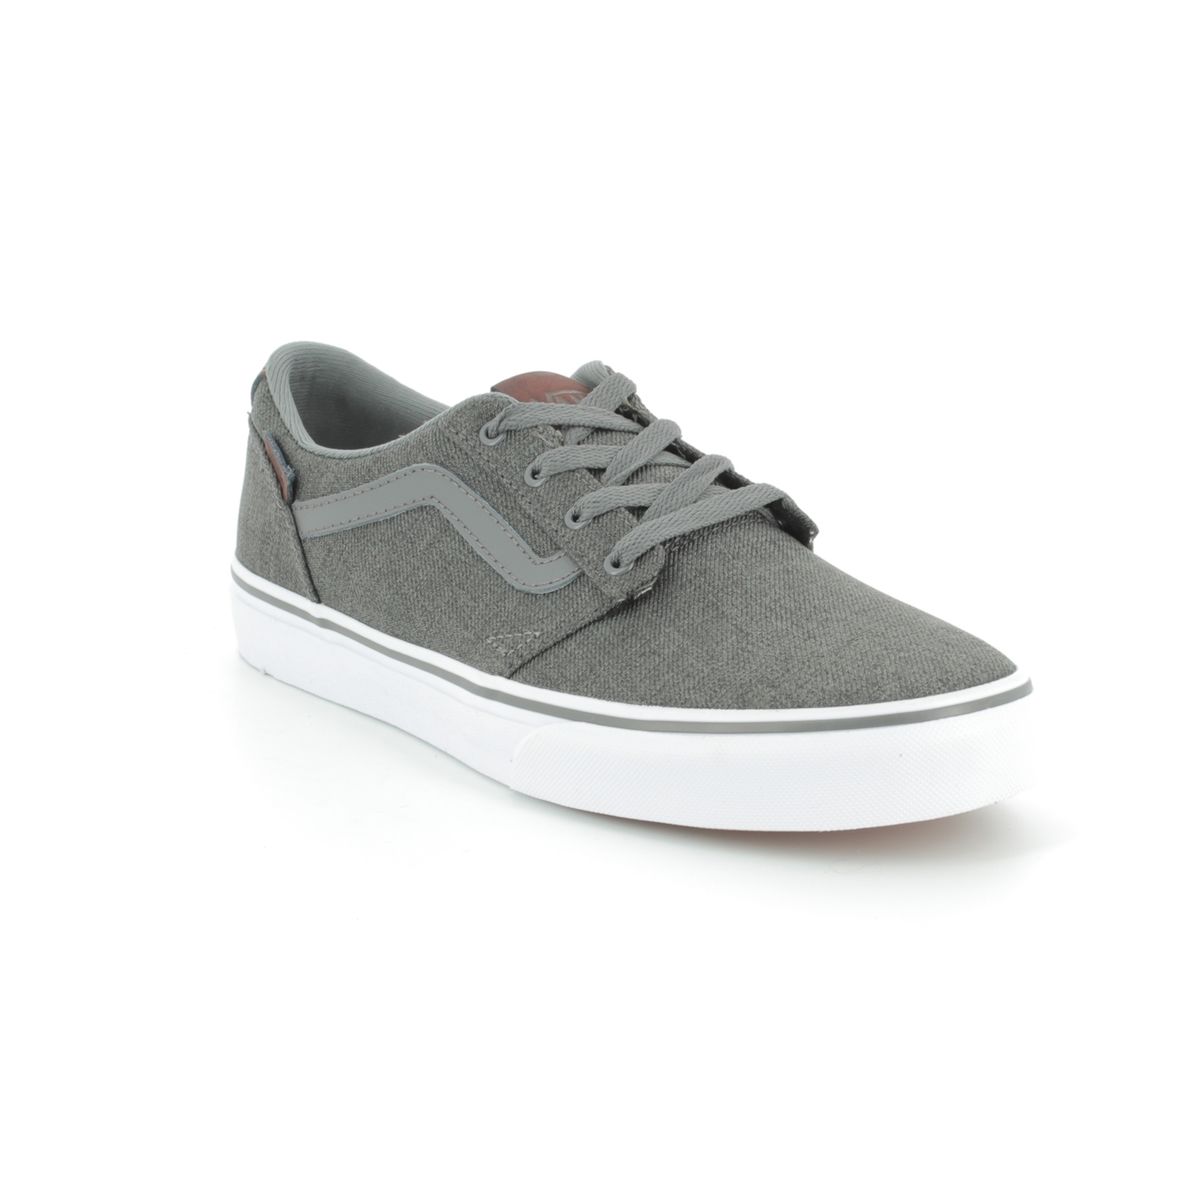 grey vans trainers Online Shopping for 